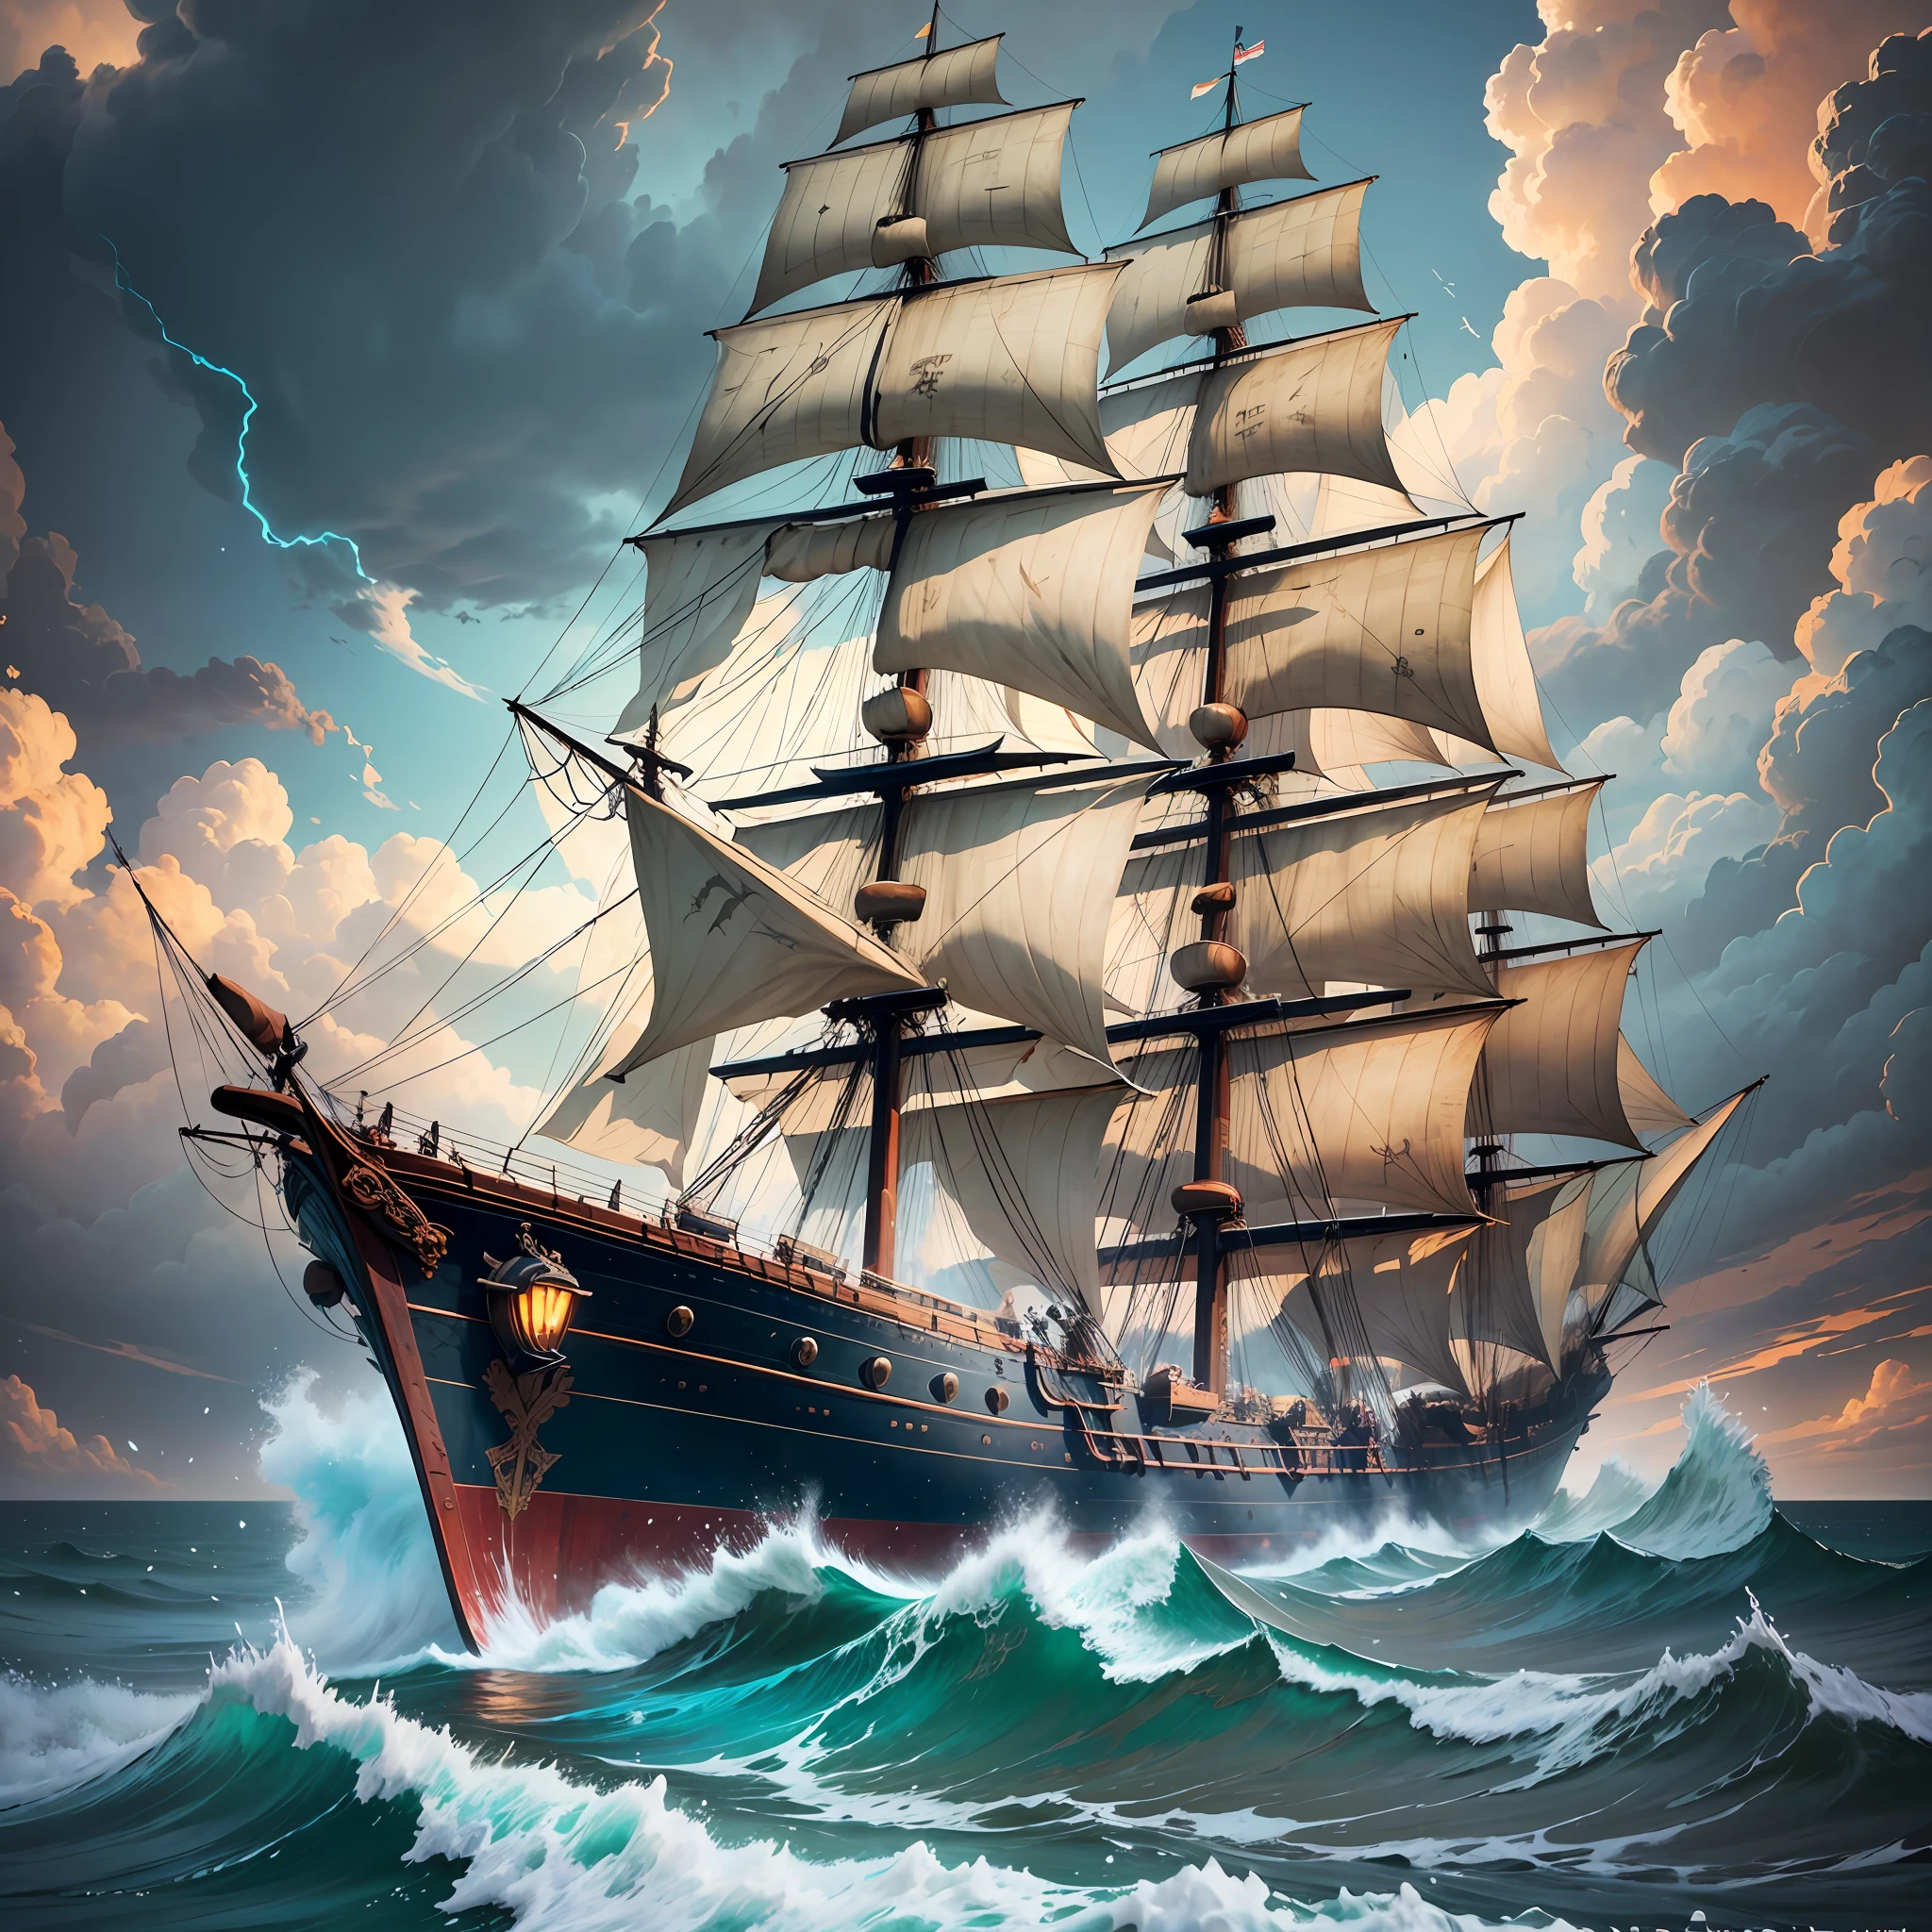 large three-masted ship under a pirate flag rising up, front view, storm,  foam on the waves, sky from orange to dark blue - SeaArt AI